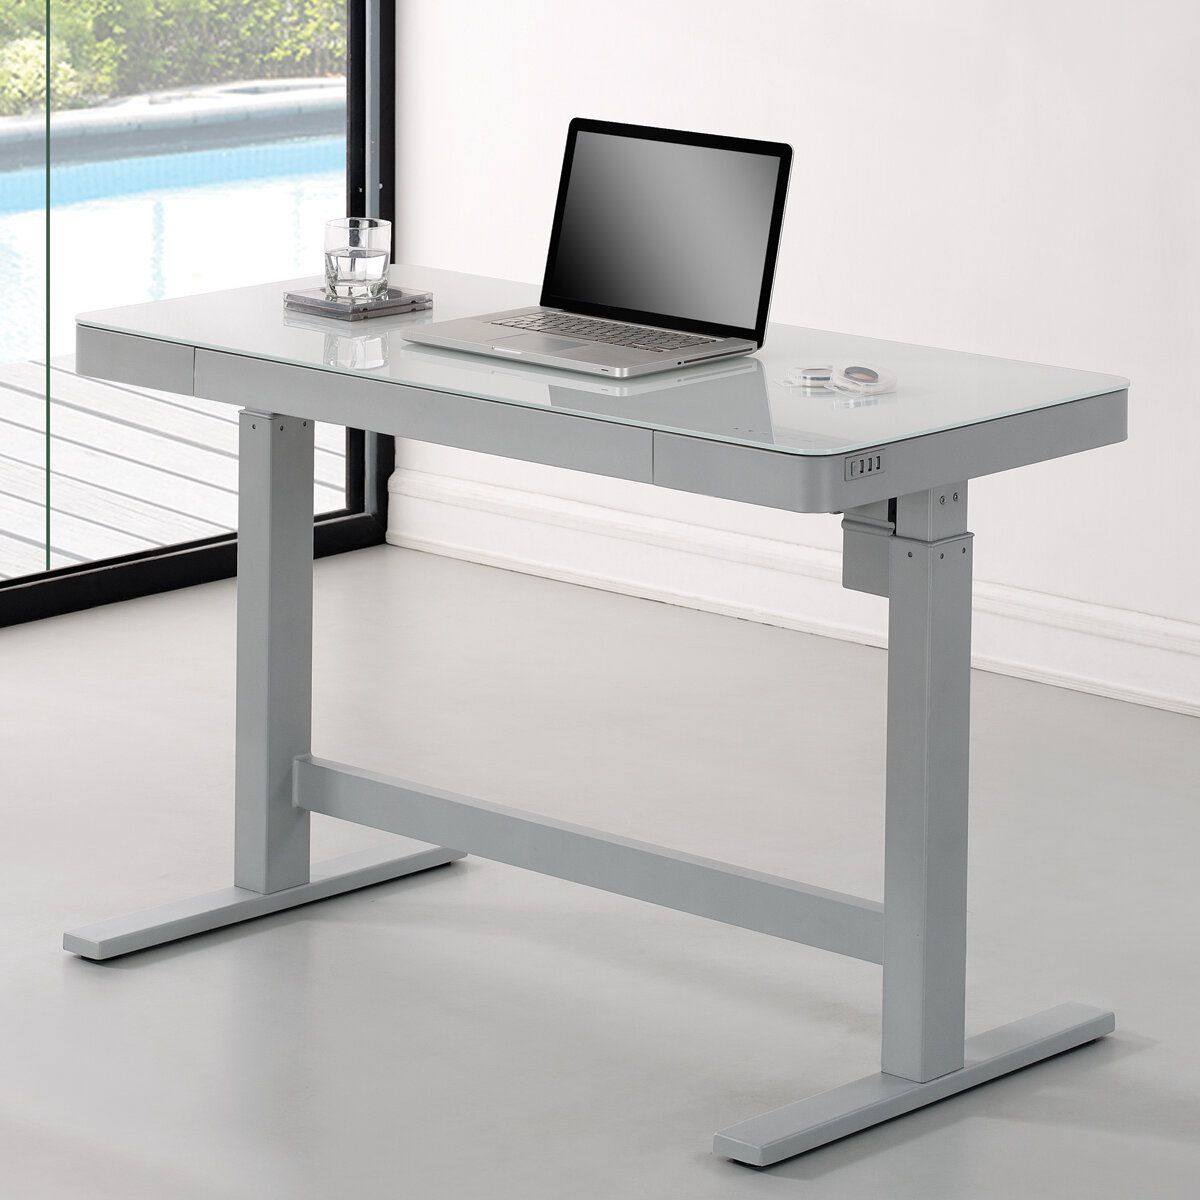 Wildon Home ® Adjustable Standing Desk & Reviews | Wayfair Within Cherry Adjustable Stand Up Desks (View 13 of 15)